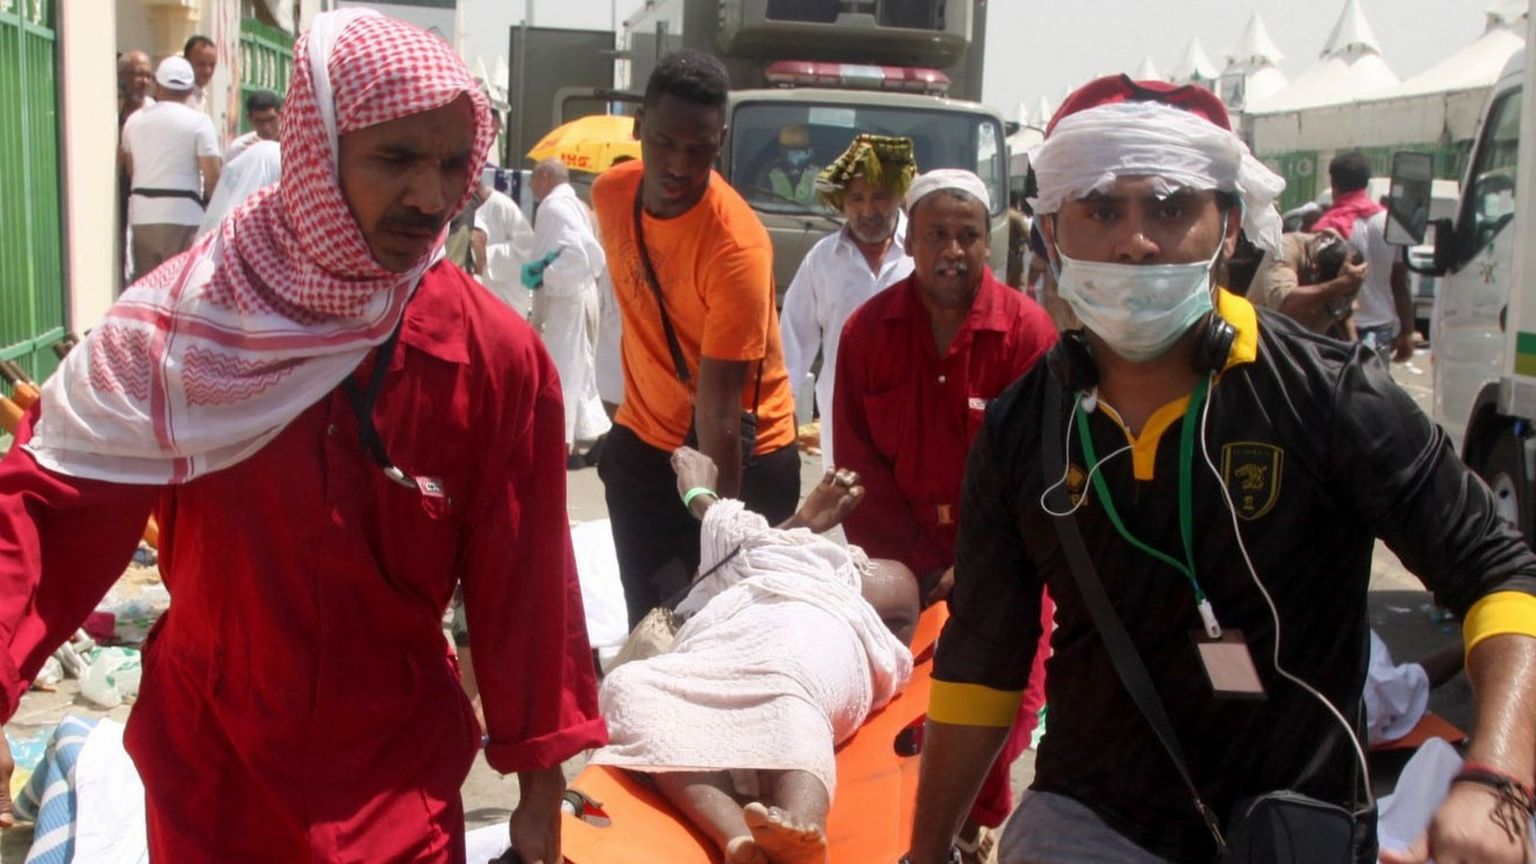 Saudi emergency personnel and pilgrims carry a wounded person at Mina on 24 September 2015